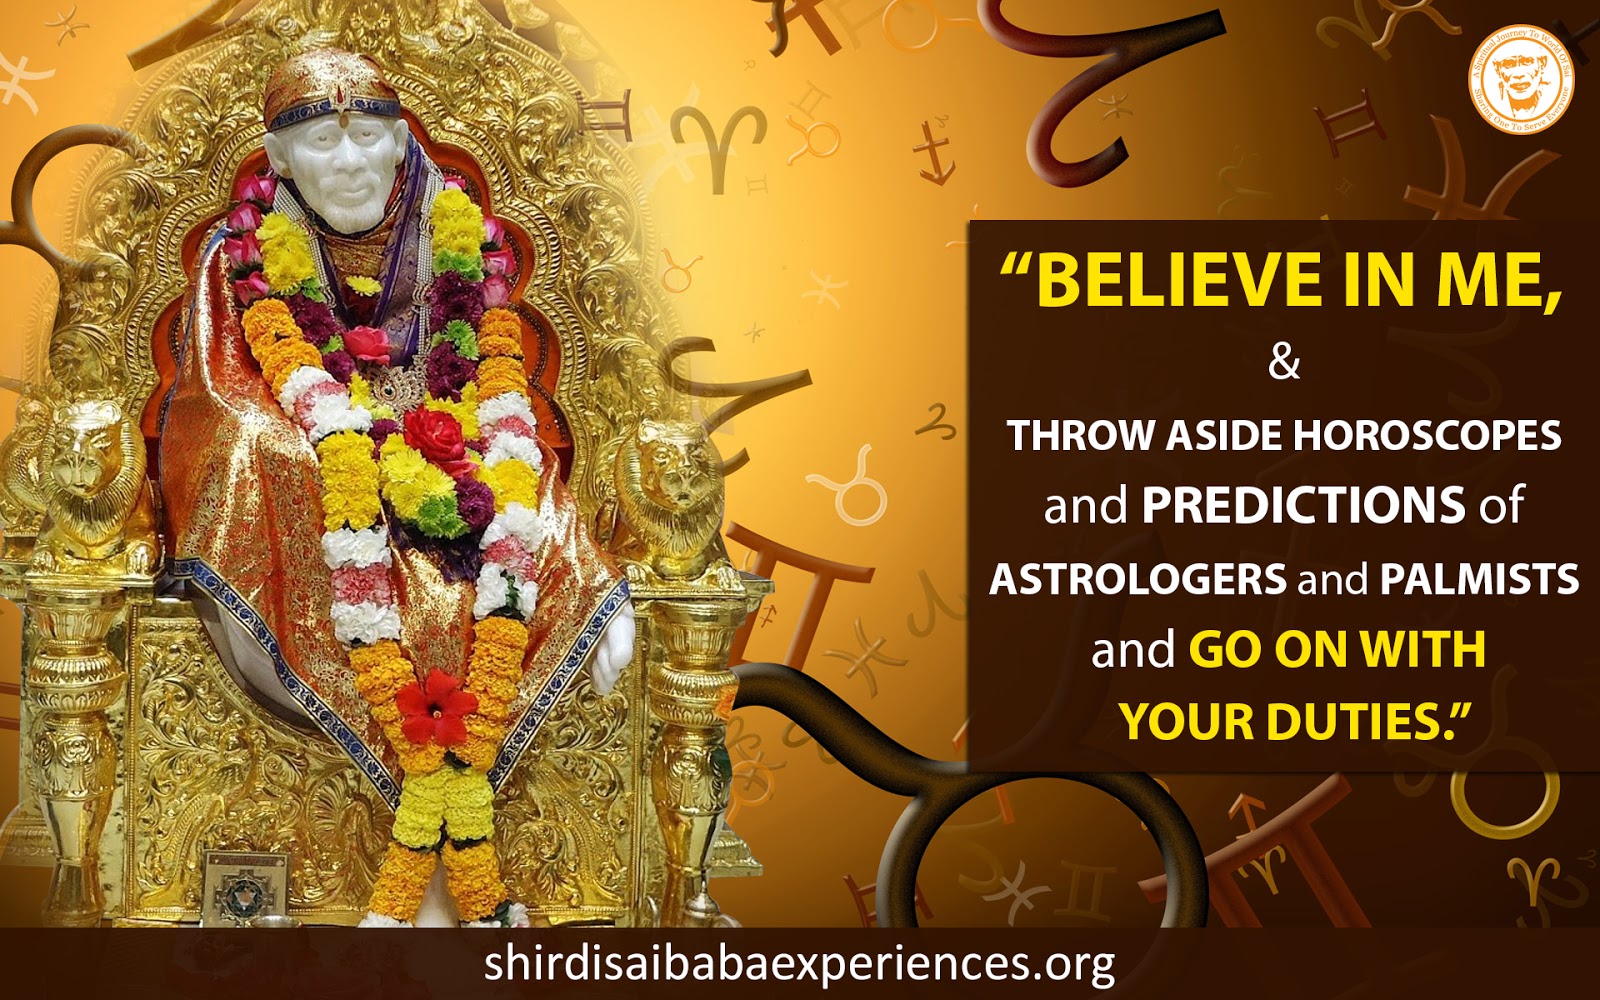 Give One & Receive Hundred Folds From Sai Baba - Experience Of Sachin